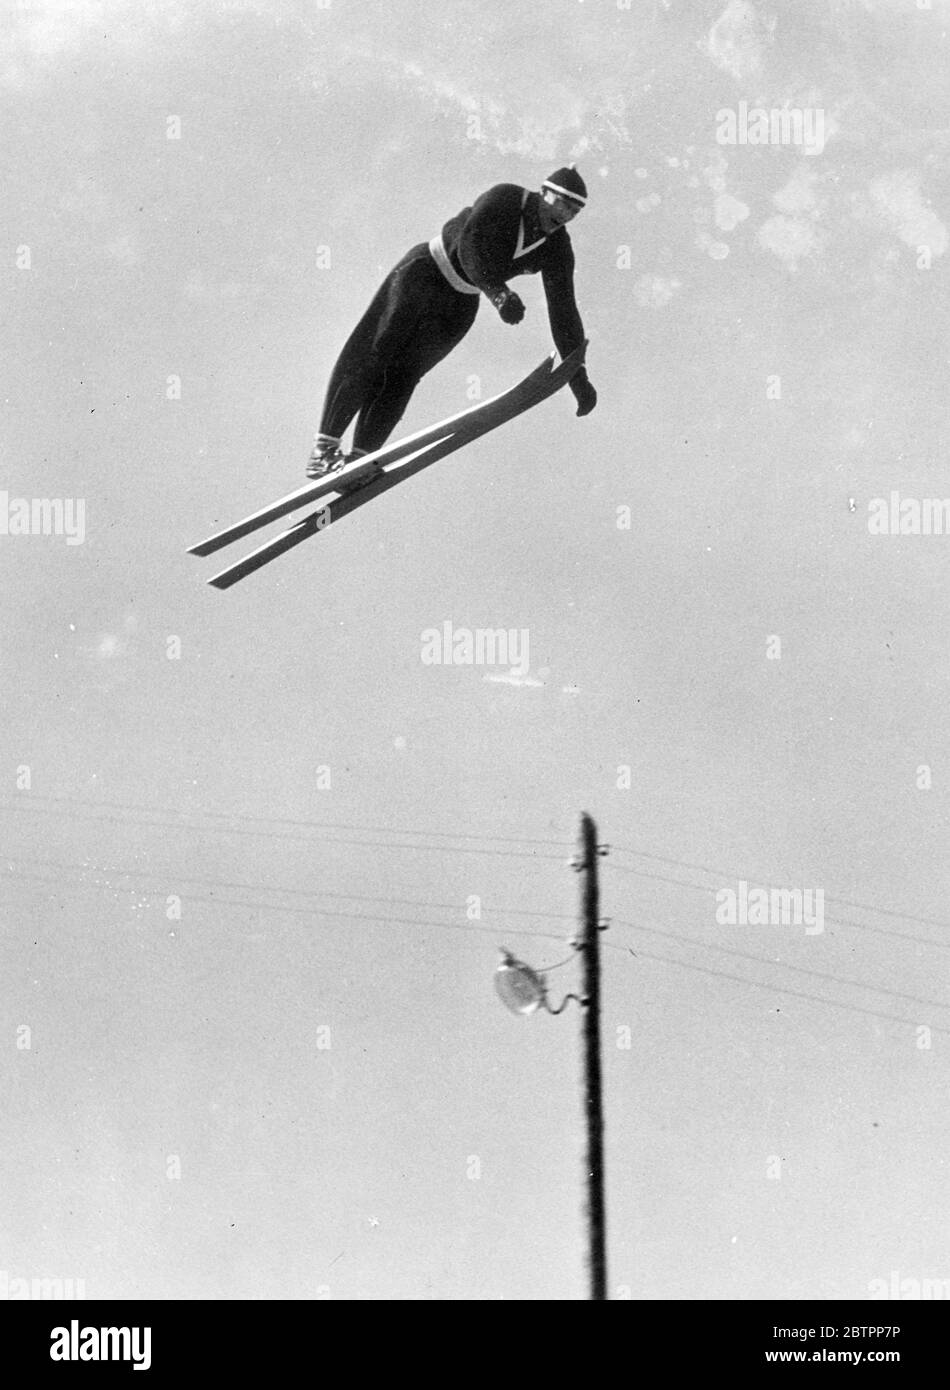 Skier in the sky. Reider Anderson, the Norwegian, soaring through the sky as he trains for the world skiing Championships at Lahtis, Finland. Stock Photo